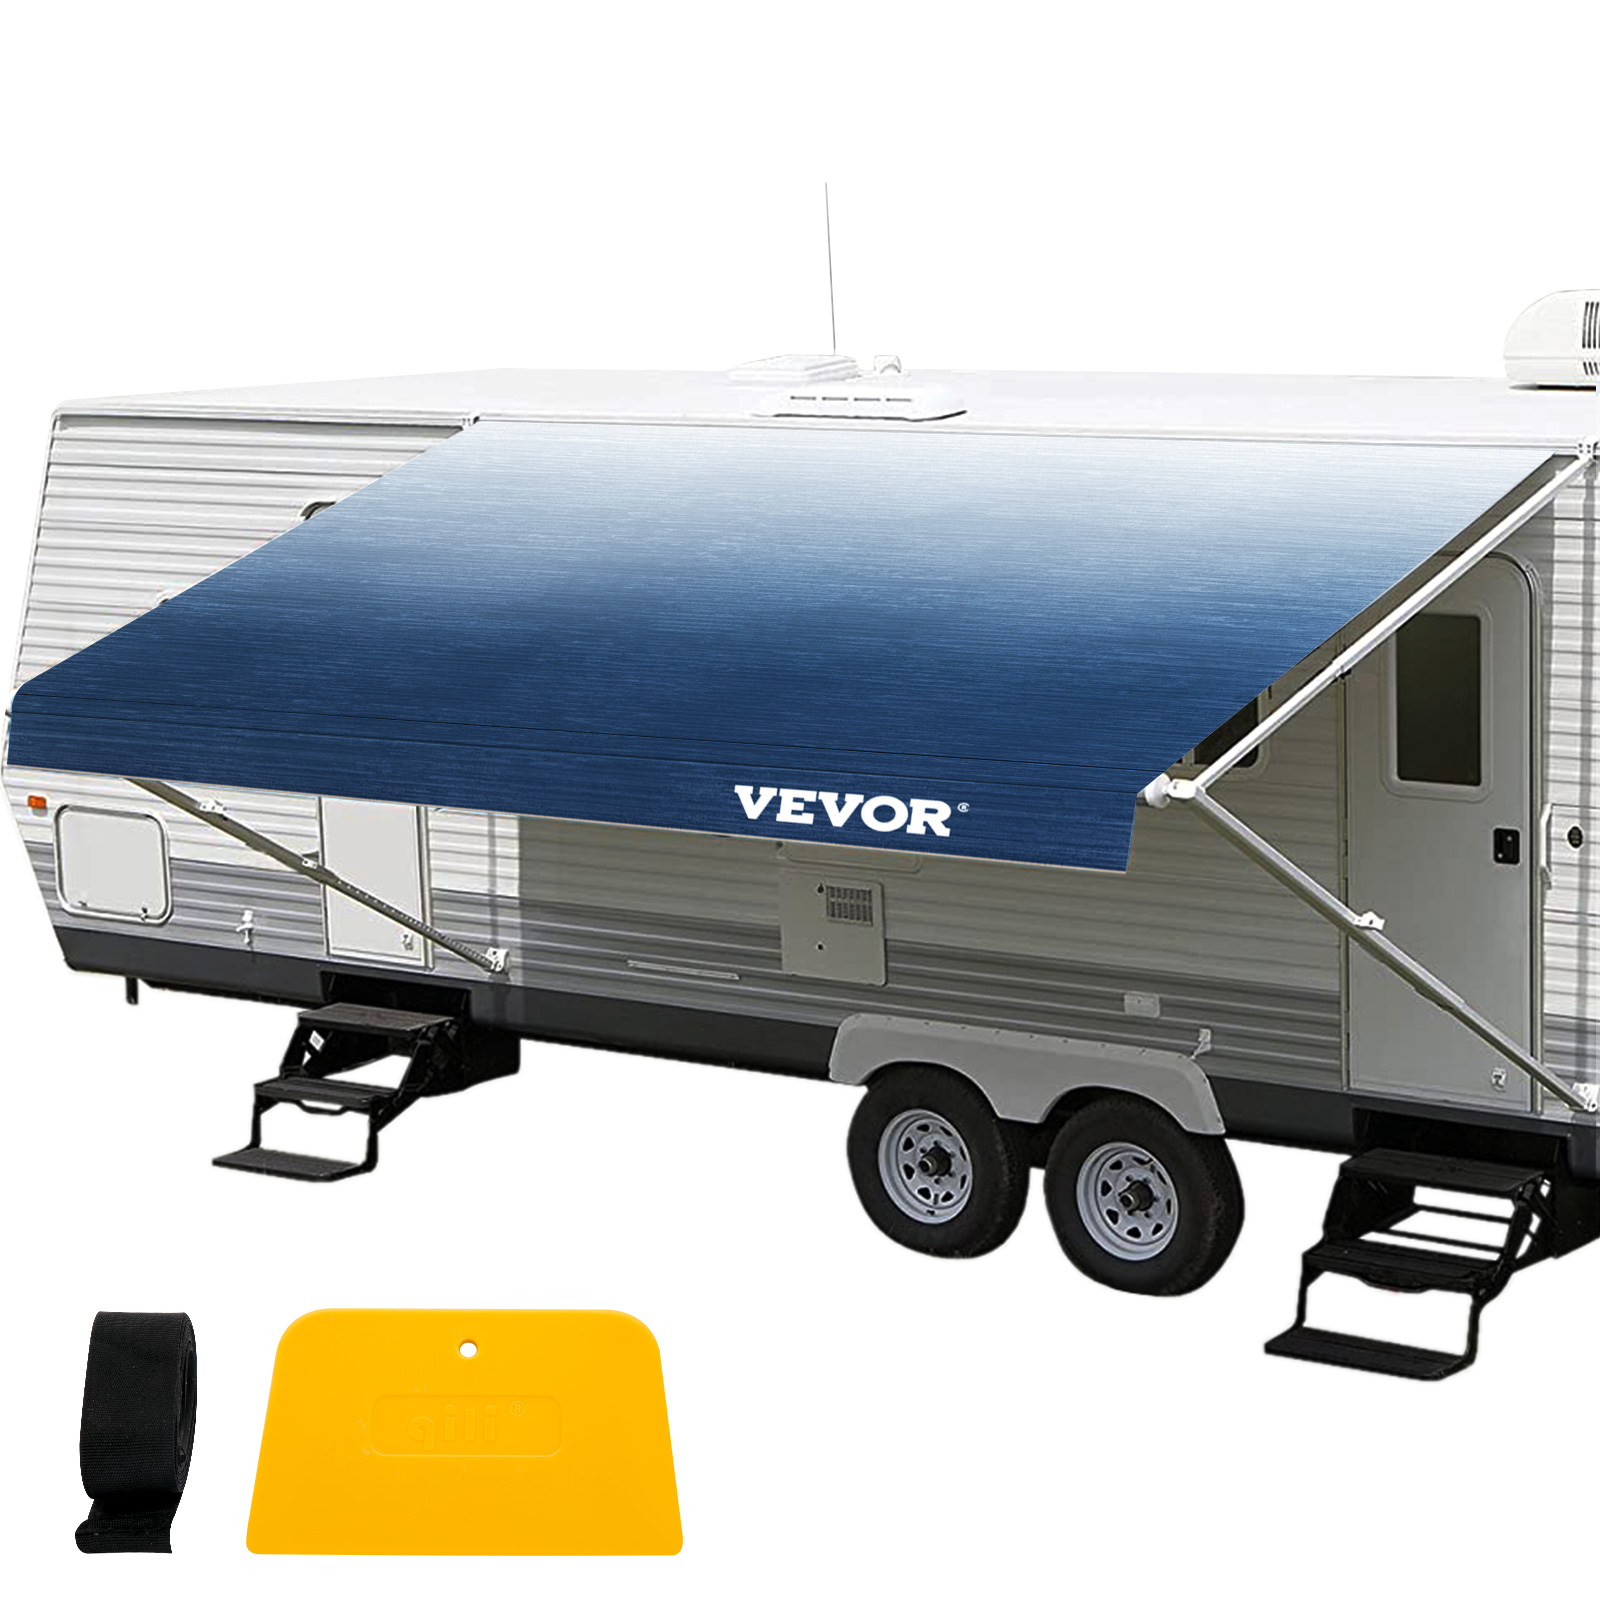 VEVOR RV Awning Fabric Replacement 18FT, Heavy Duty Weatherproof